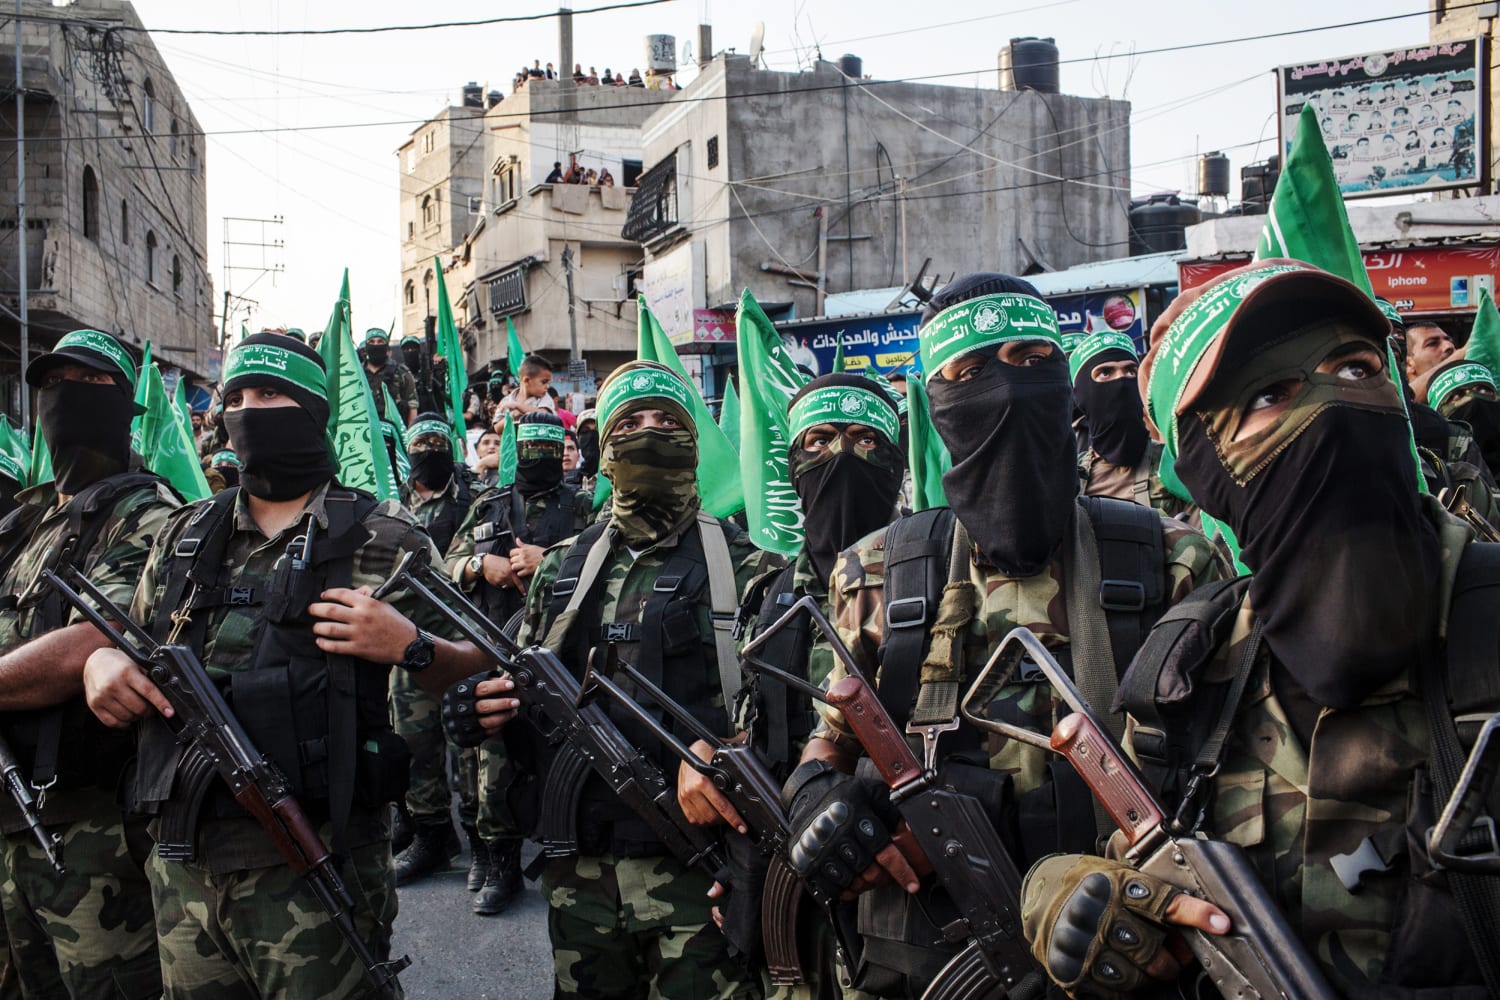 Hamas group explained: Here's what to know about the group behind the deadly attack in Israel